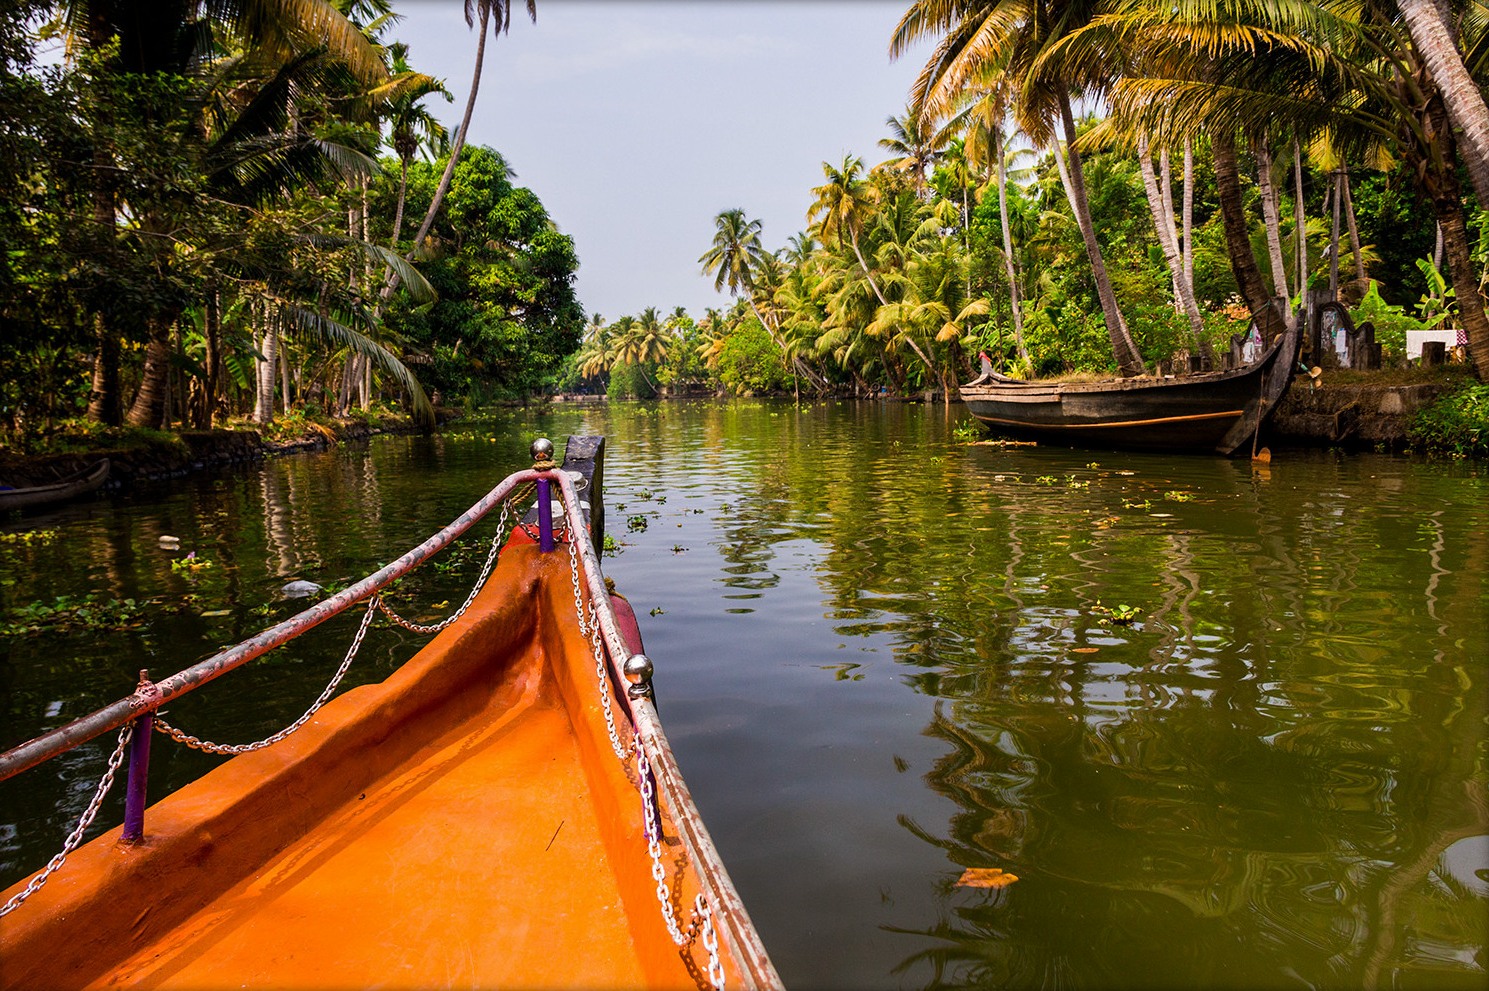 The Shikara cruise in the narrow canals of Alleppey